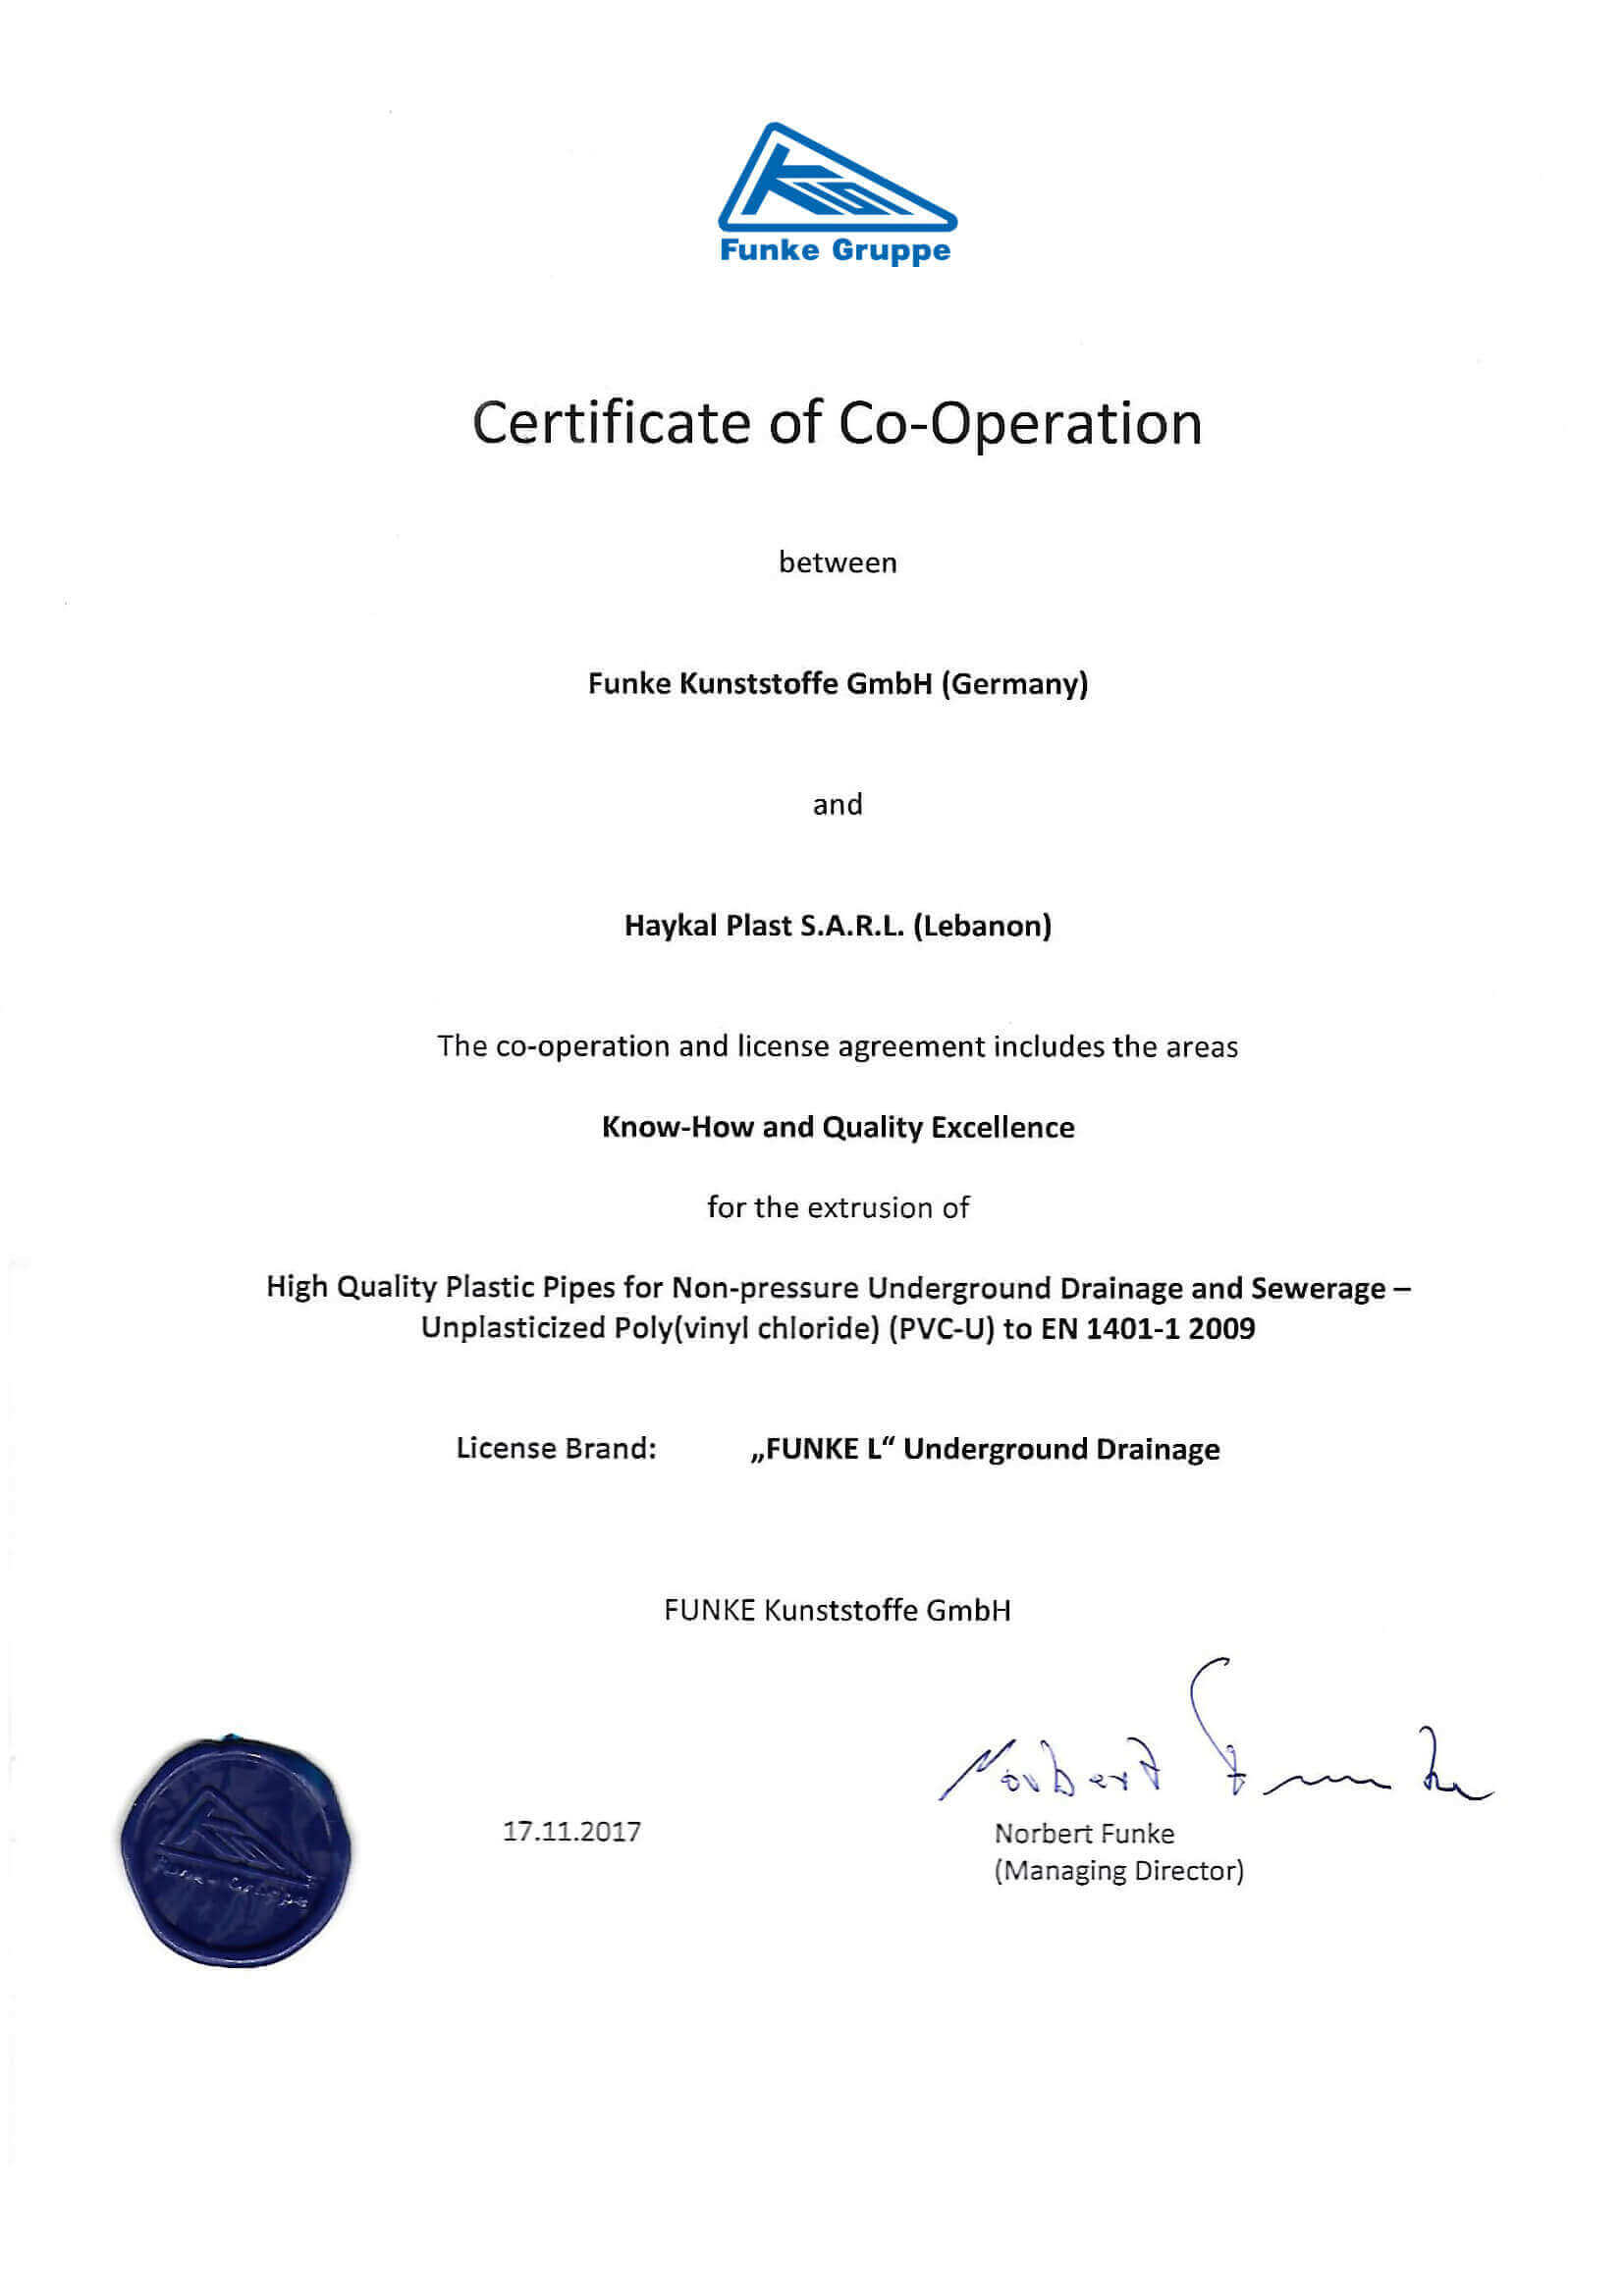 Haykal Plast Funke Certificate of Co-Operation - High Quality Plastic Pipes for Non-Pressure Underground Drainage and Sewerage - PVC-U